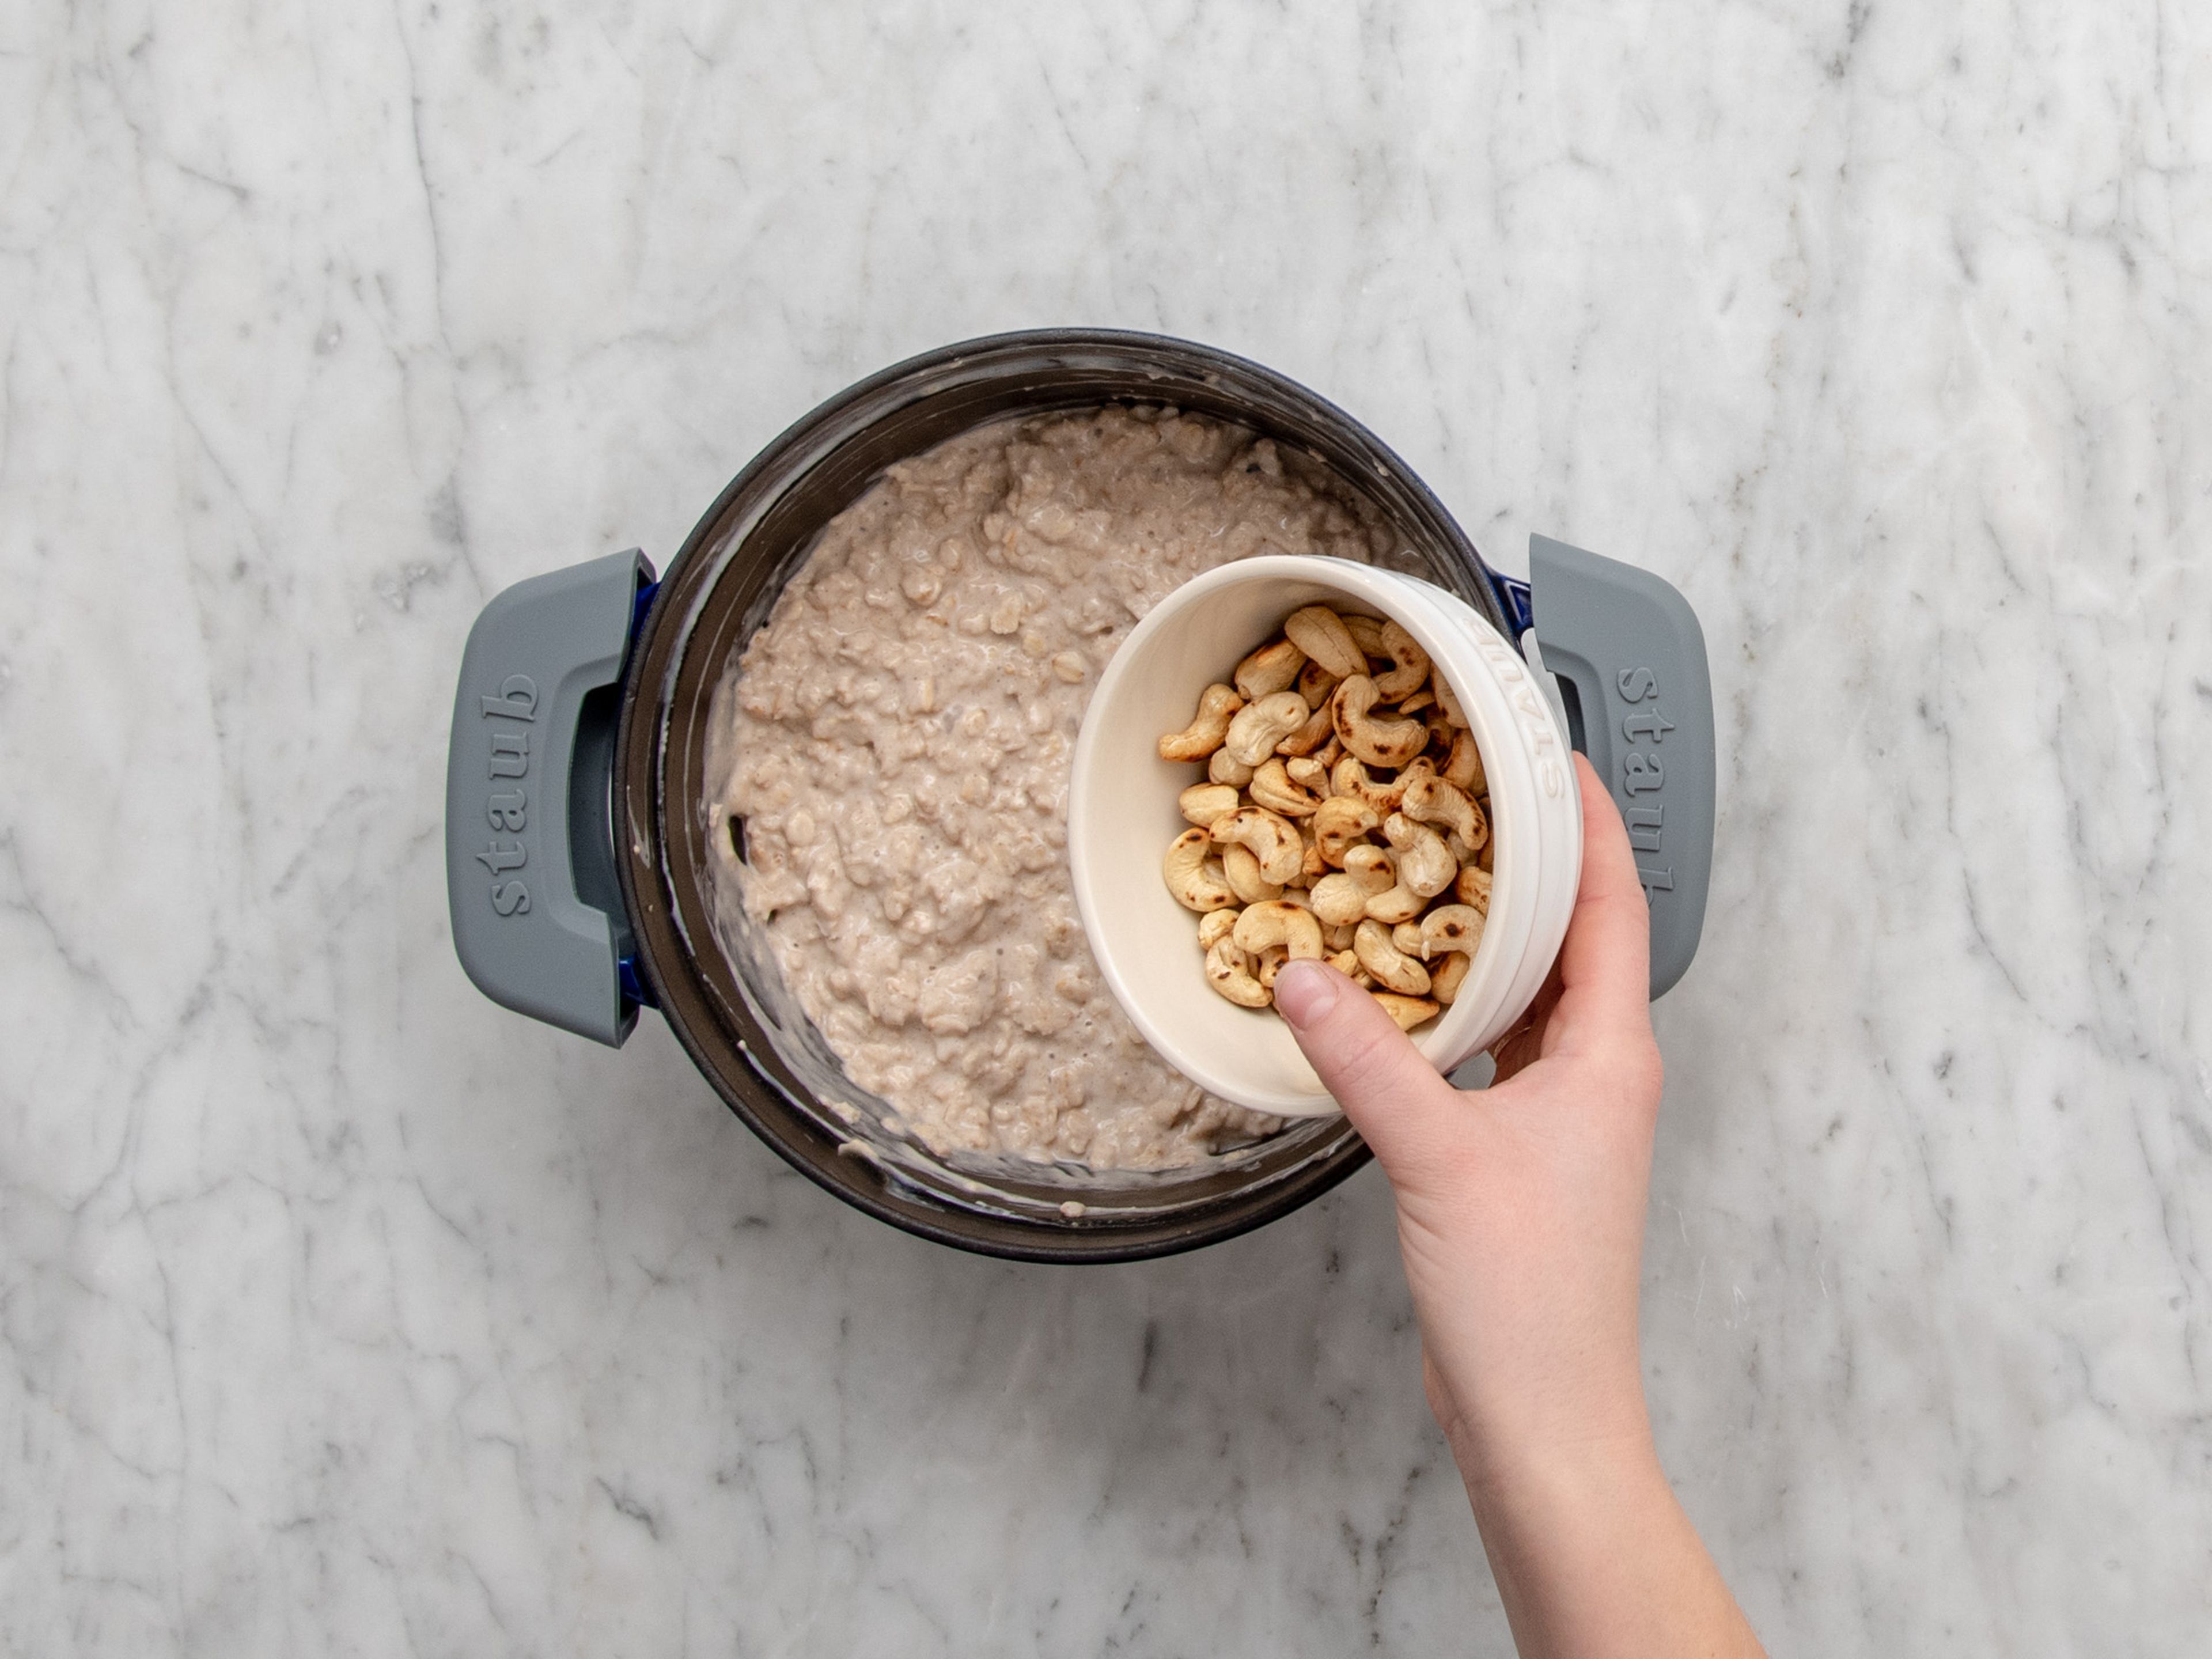 As soon as the porridge is done, remove from heat, add toasted cashews and honey, and stir to combine.